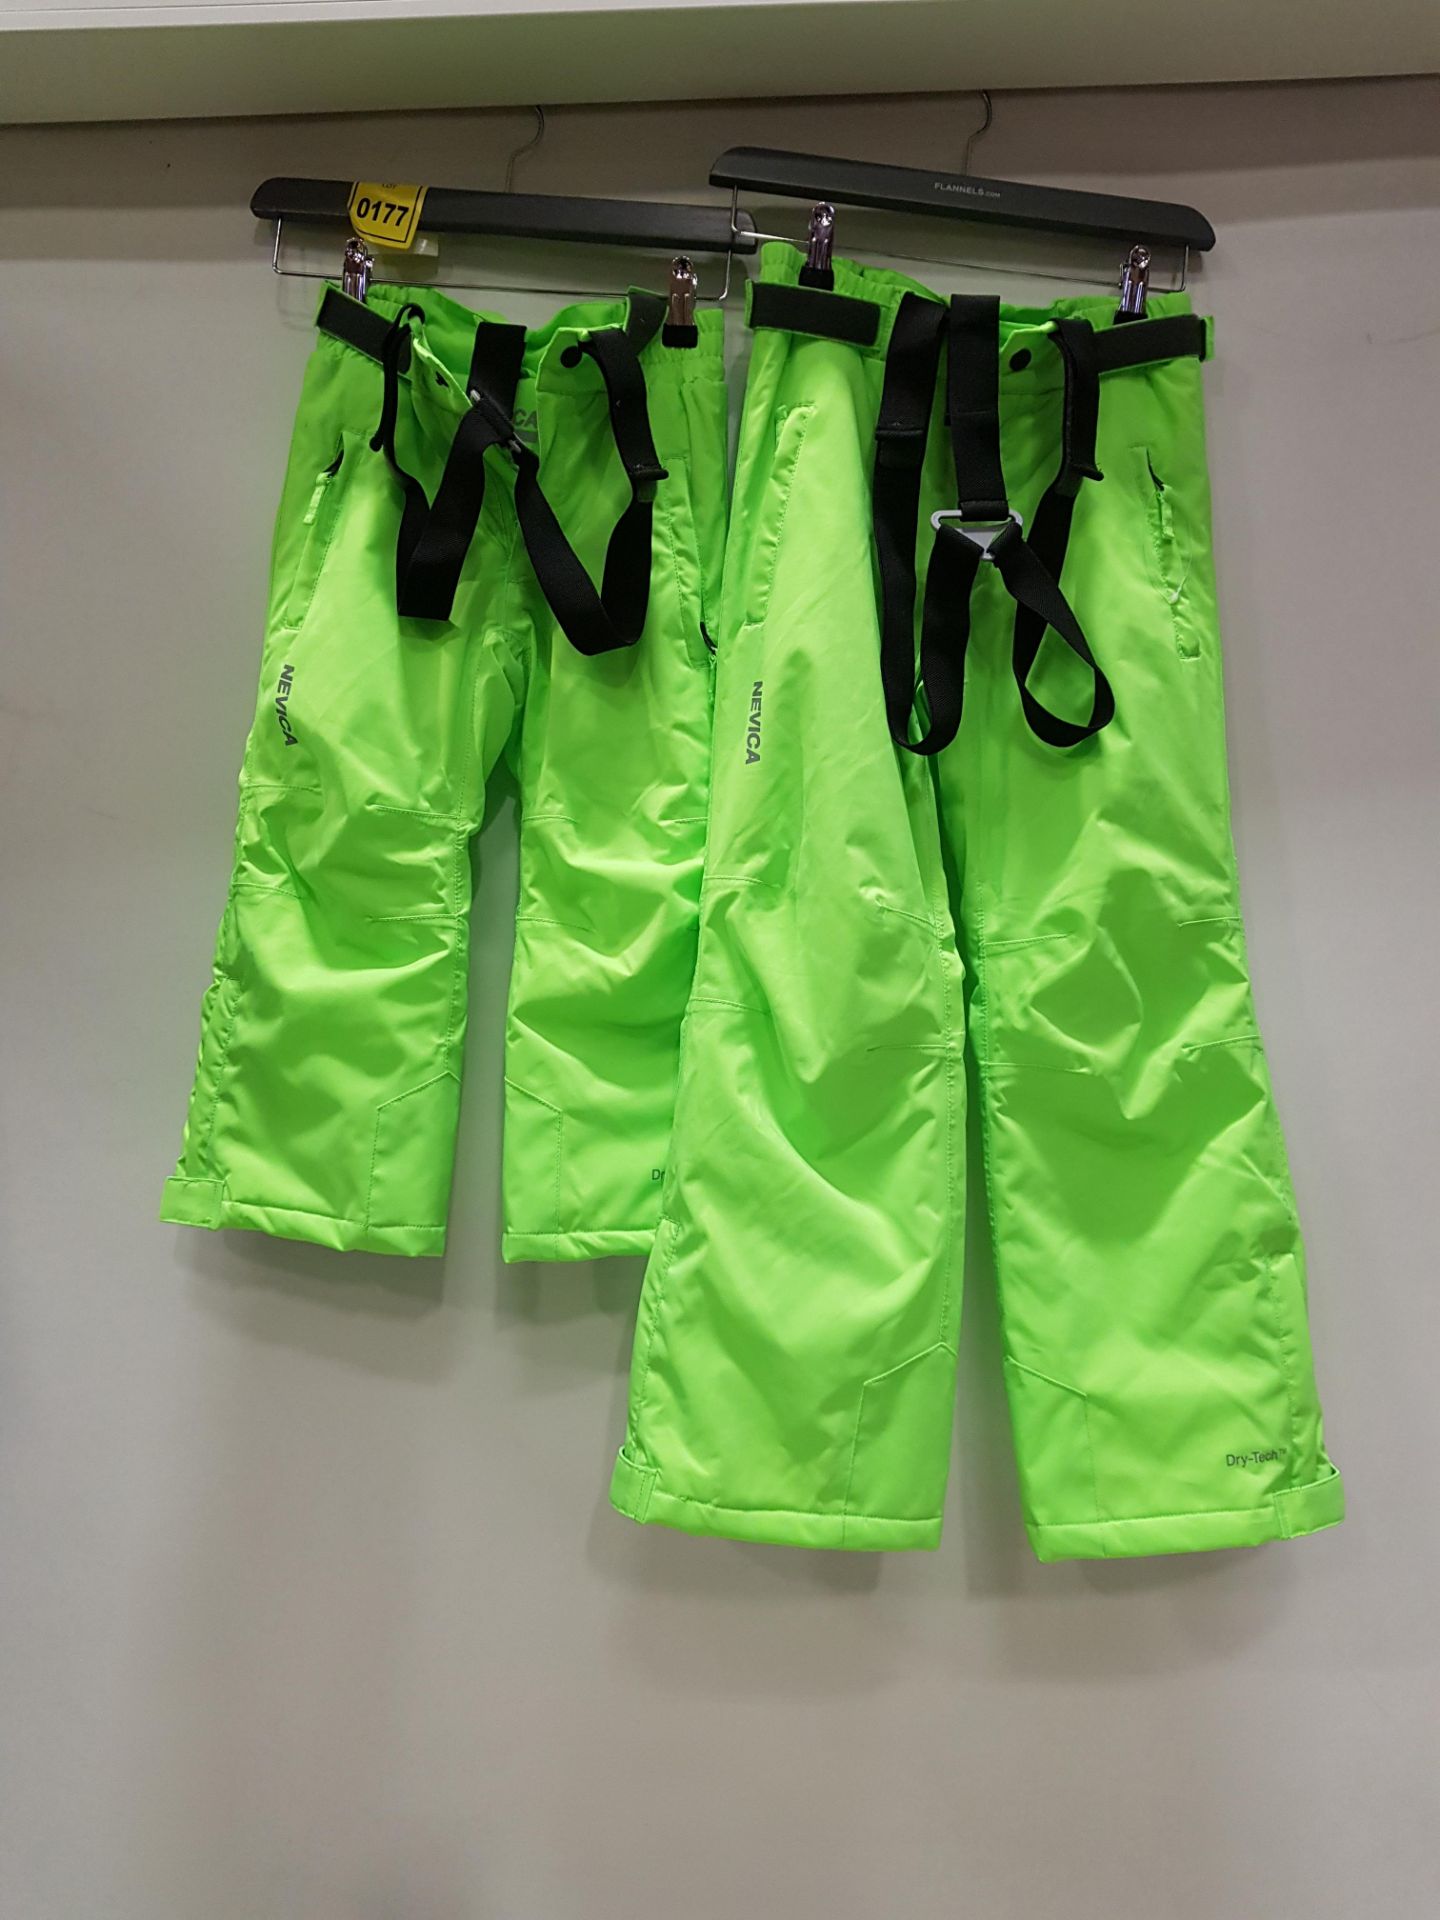 2 X BRAND NEW NEVICA THERMAL SKI PANTS IN LIME GREEN ( SIZES 4-5 YRS AND 8-9 YRS)